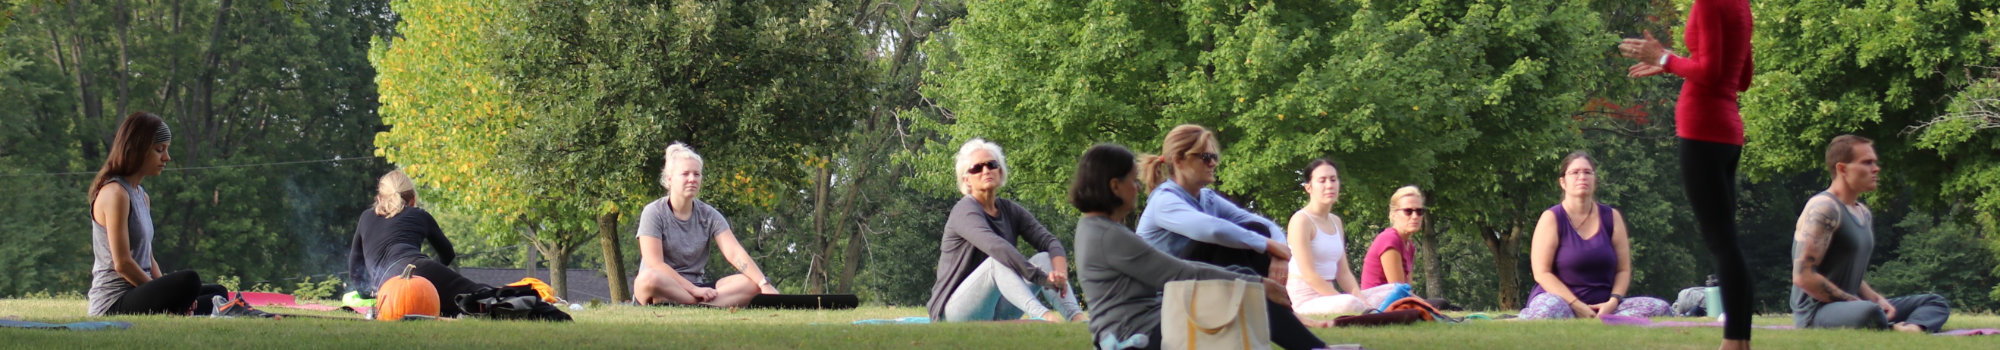 Adult yoga class in the park